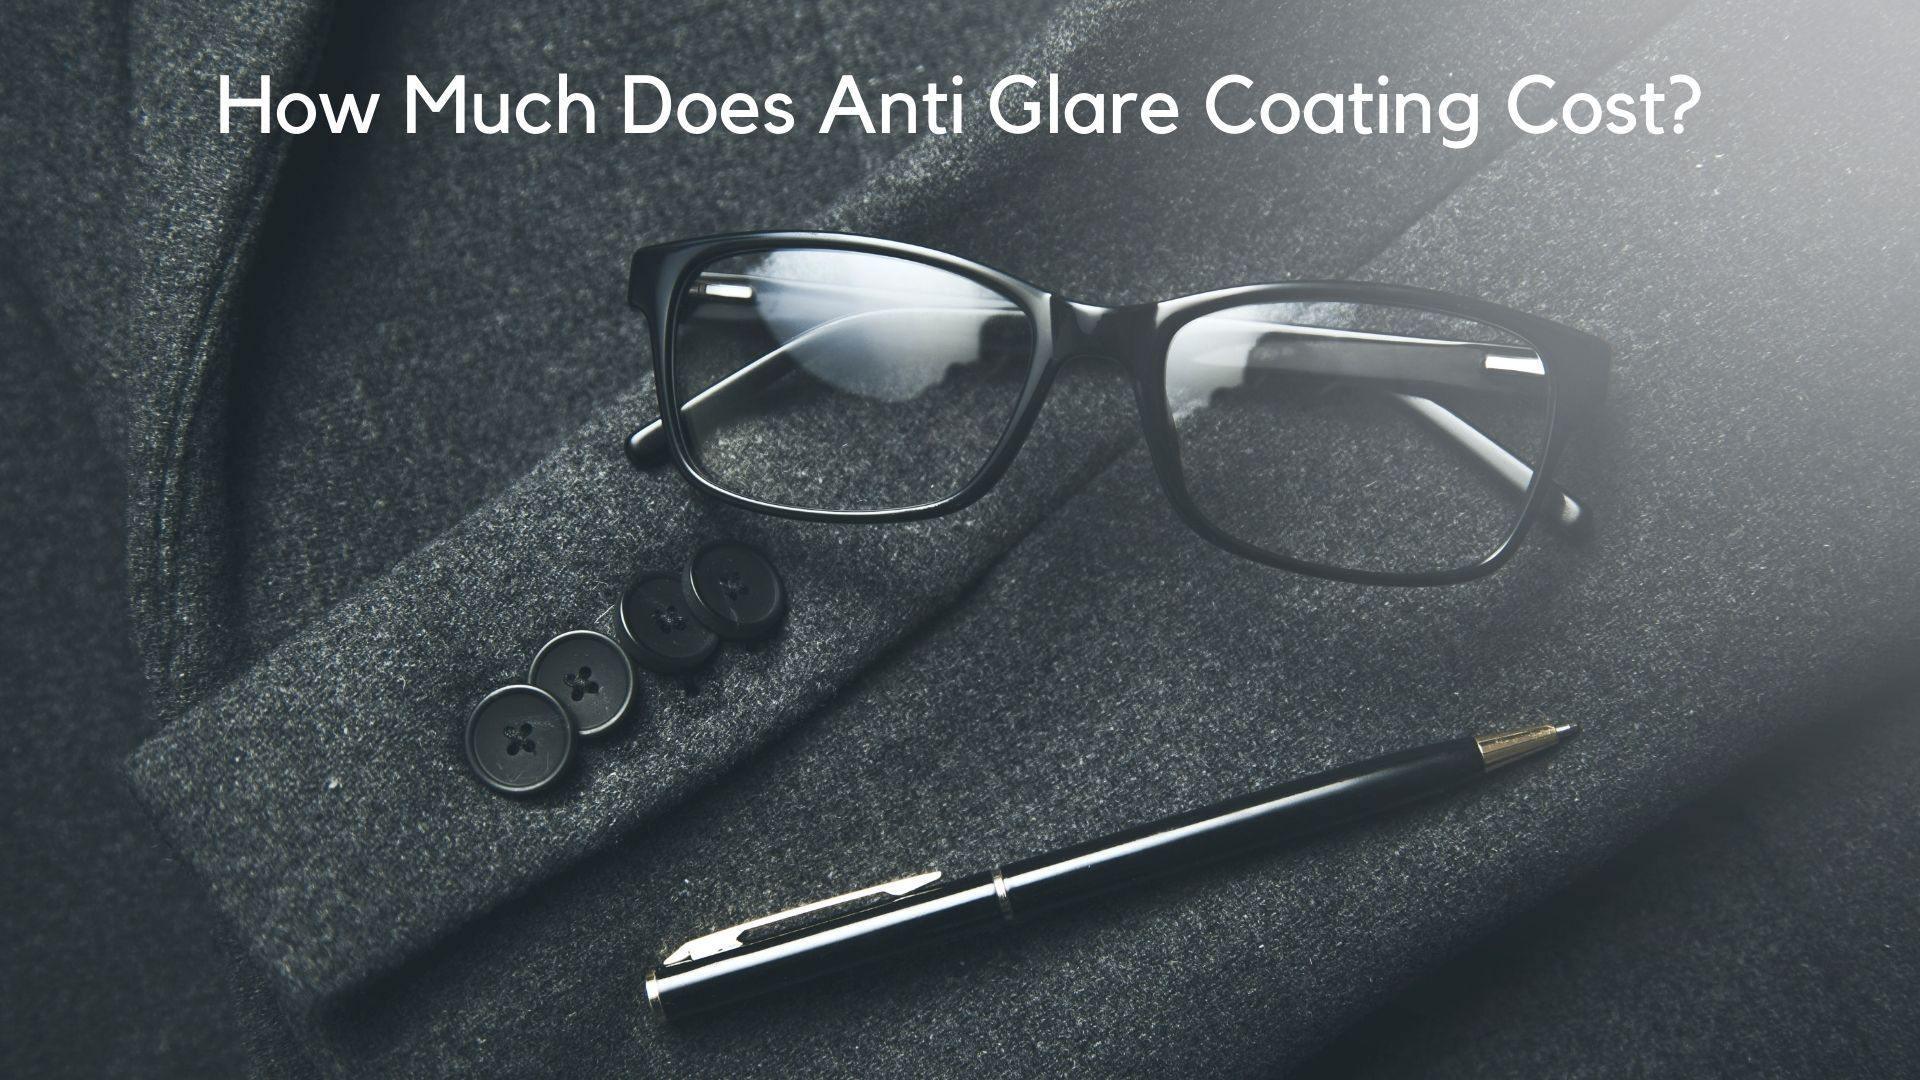 How Can I Tell if My Glasses are Anti Glare?